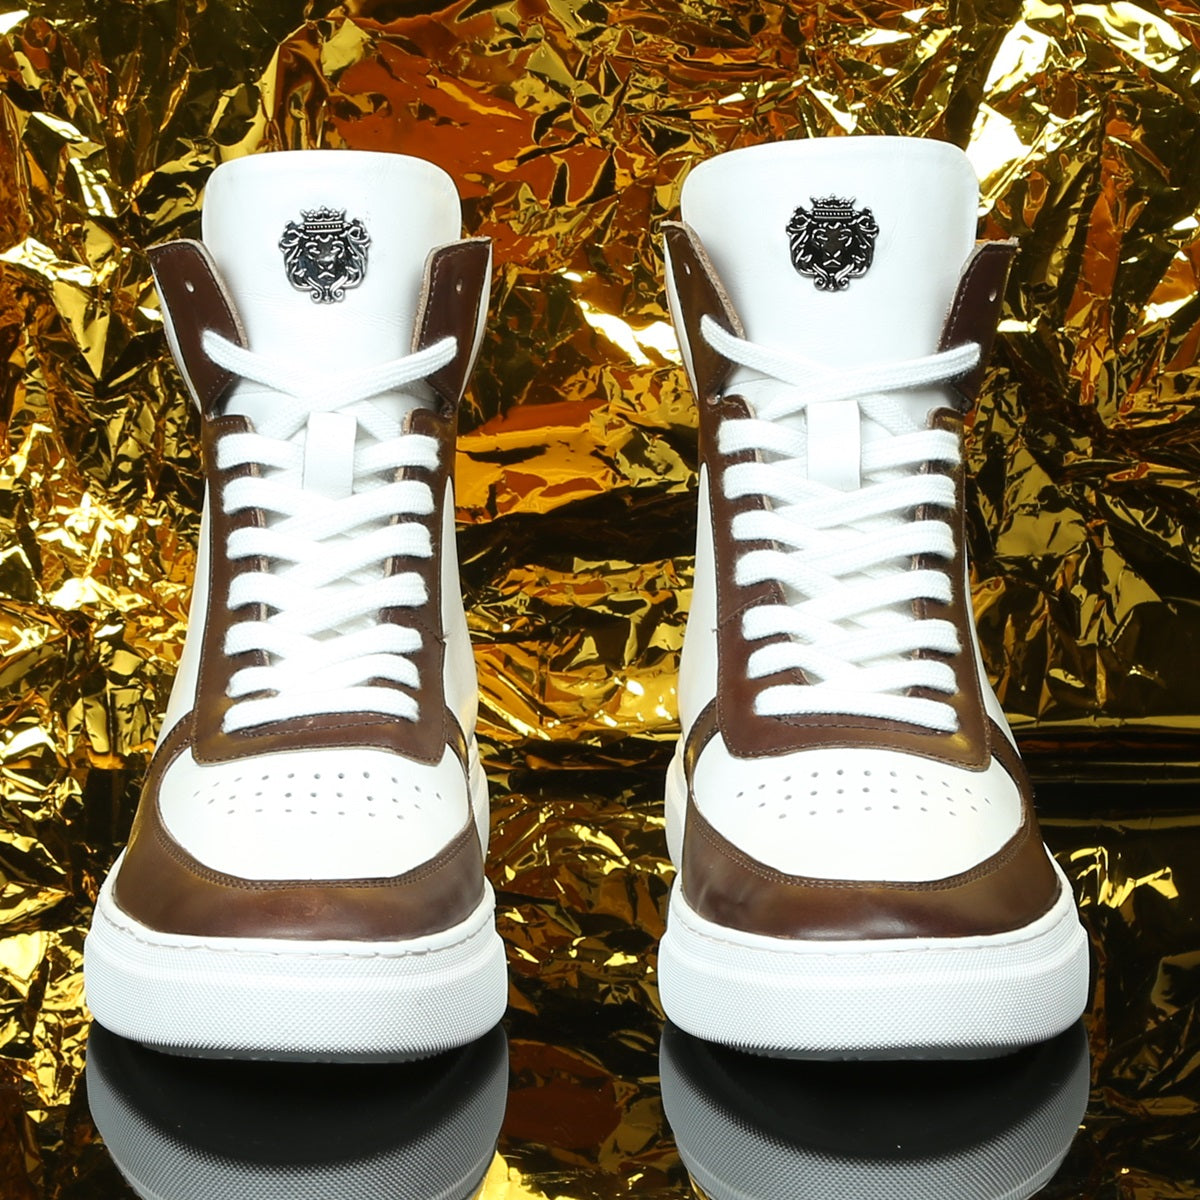 Contrasting Brown & Tan Leather Sneakers White High Ankle by Brune & Bareskin 40/6